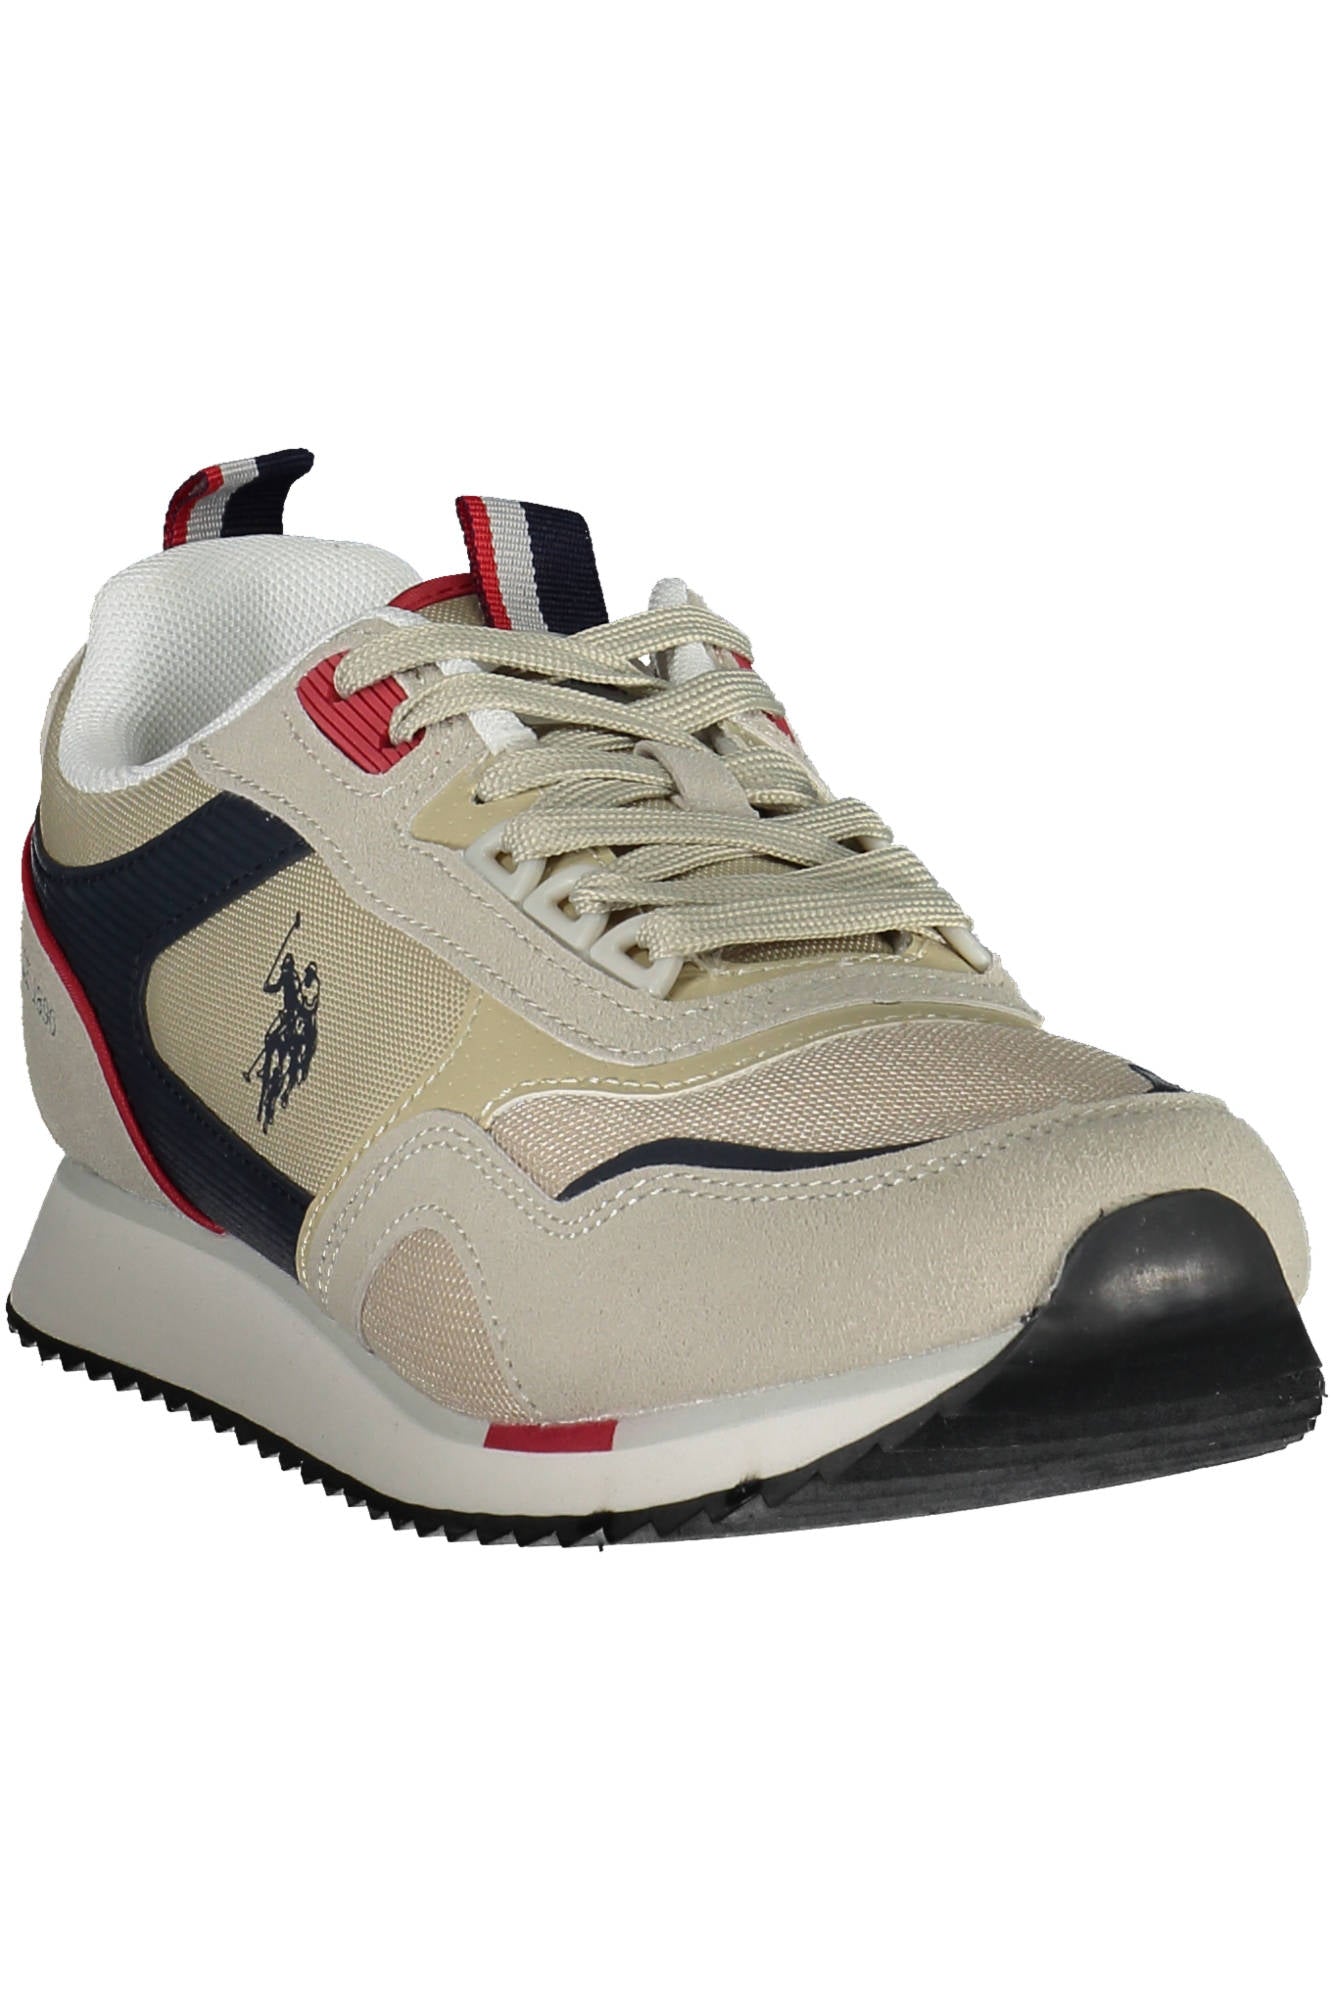 US POLO BEST PRICE BEIGE MAN SPORT SHOES